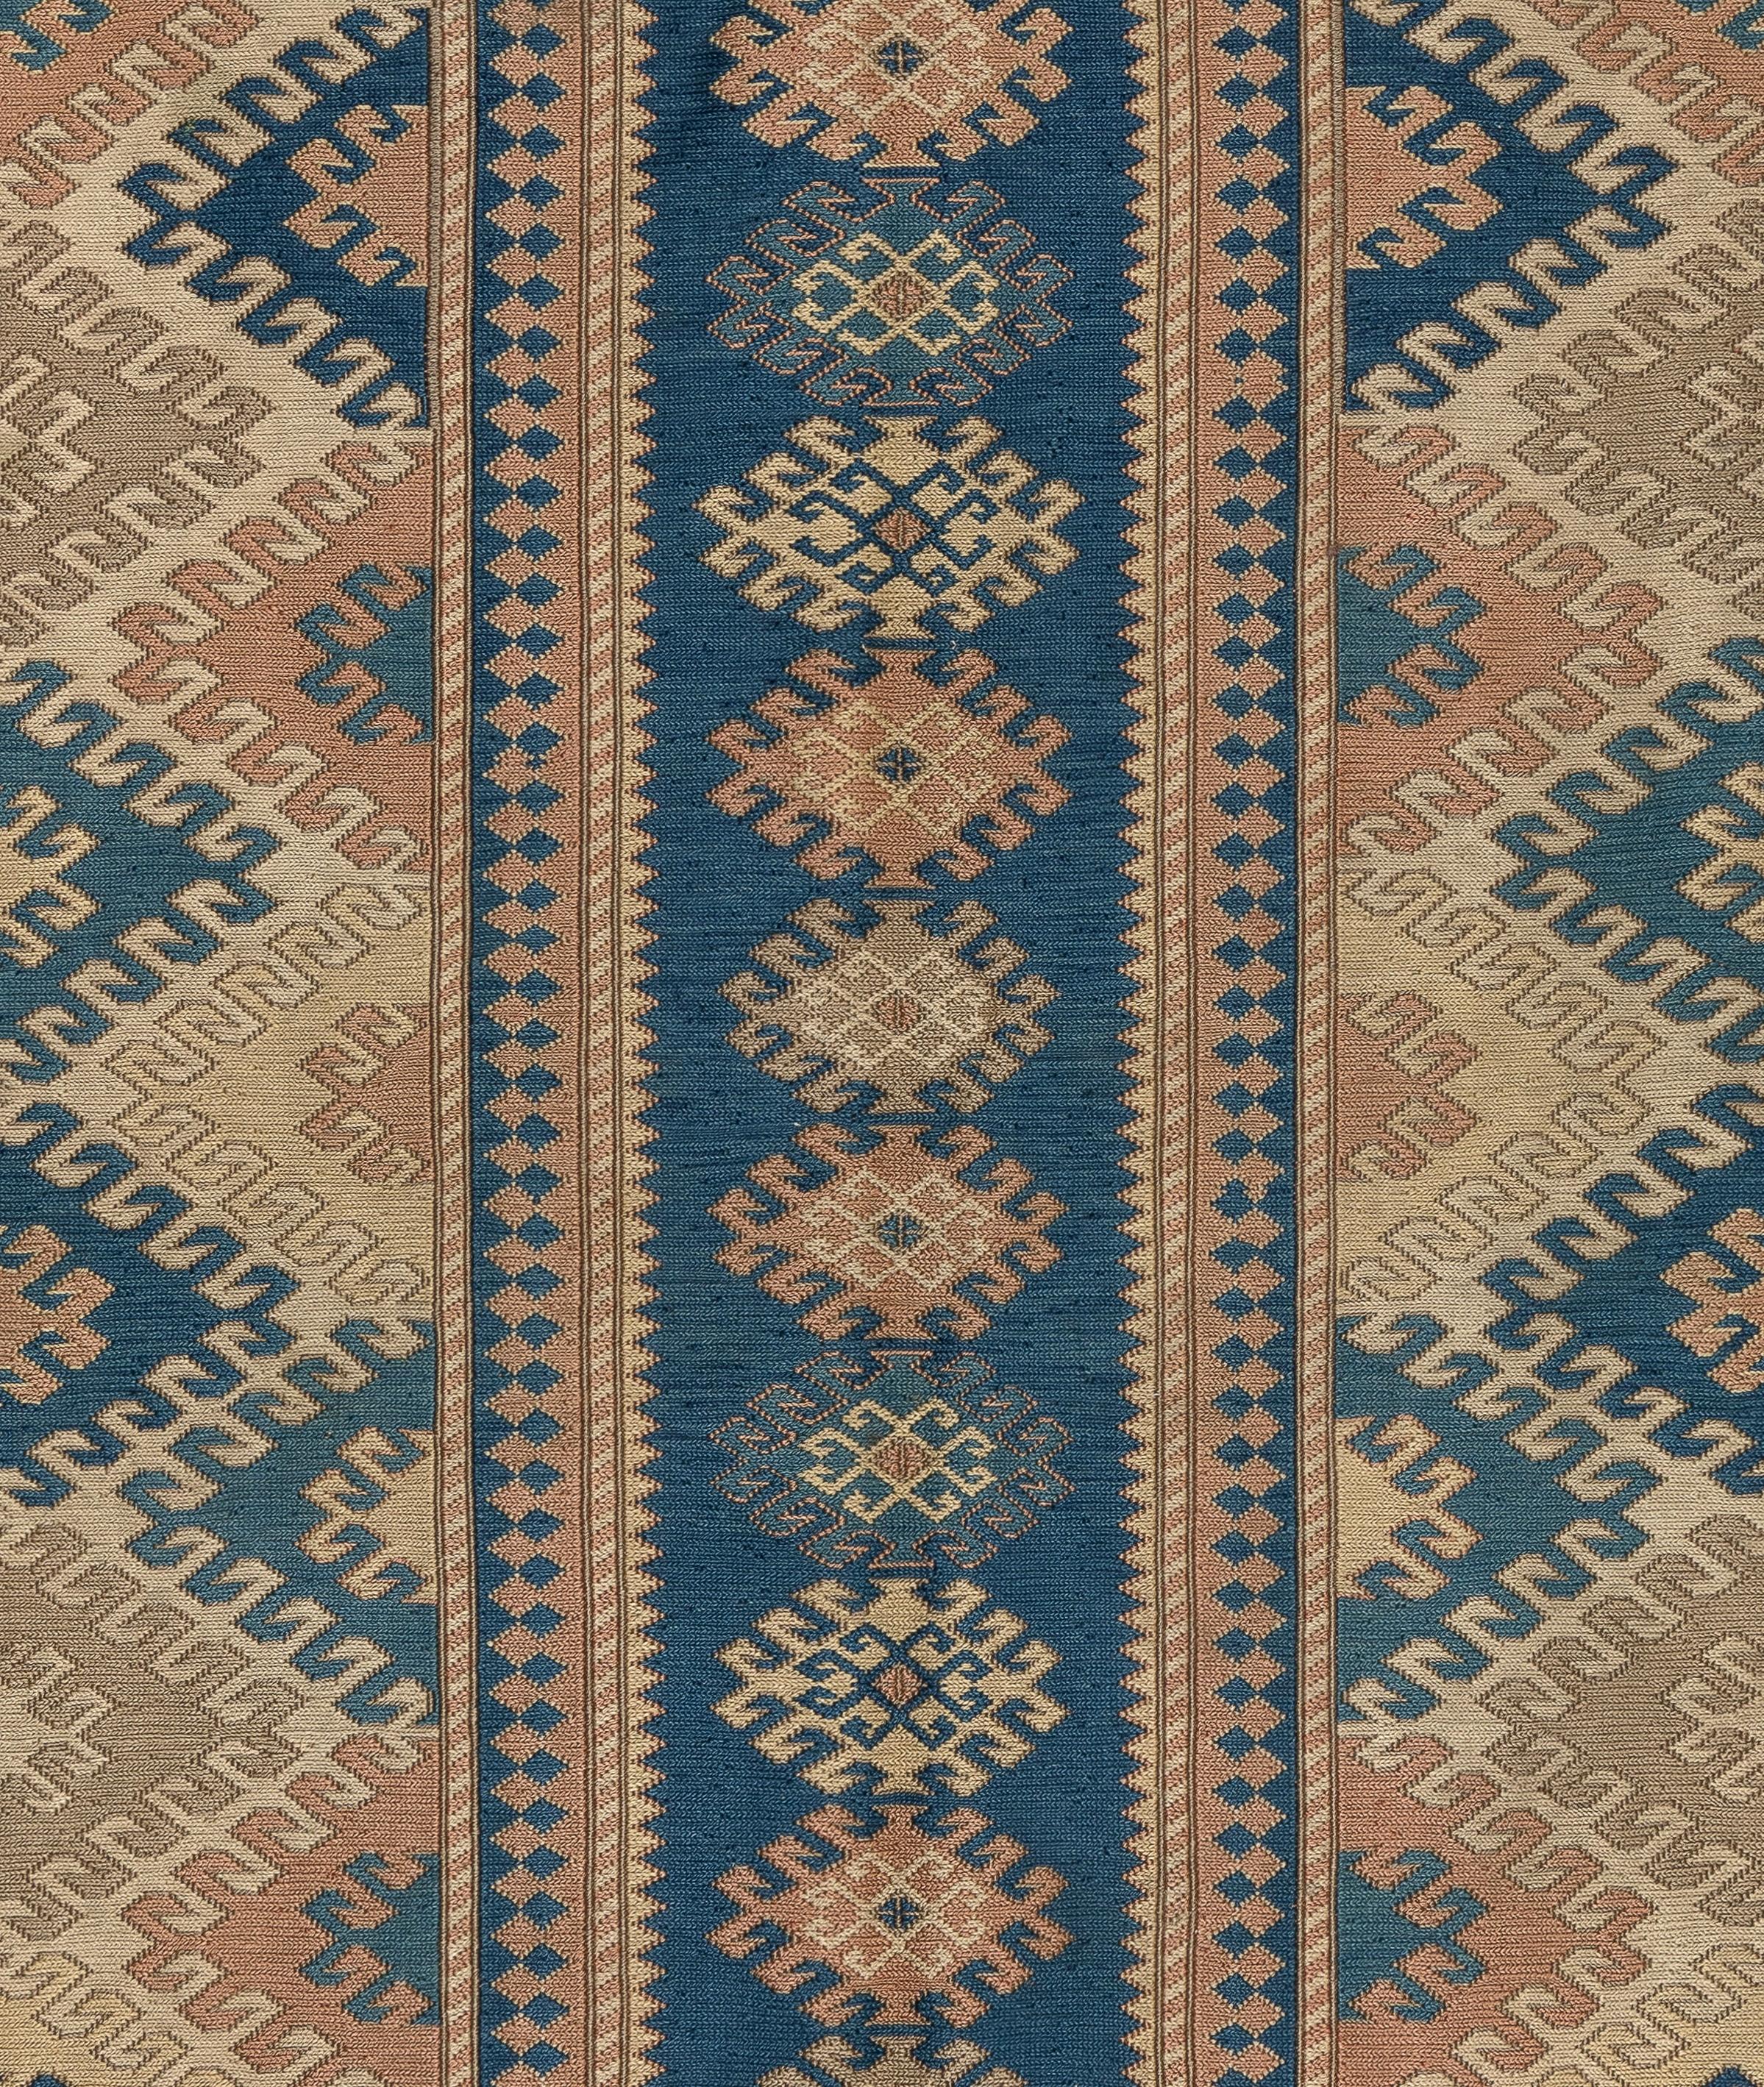 Hand-Woven 4x5.8 Ft Vintage Soumak Turkish Accent Rug with Wool Pile For Sale